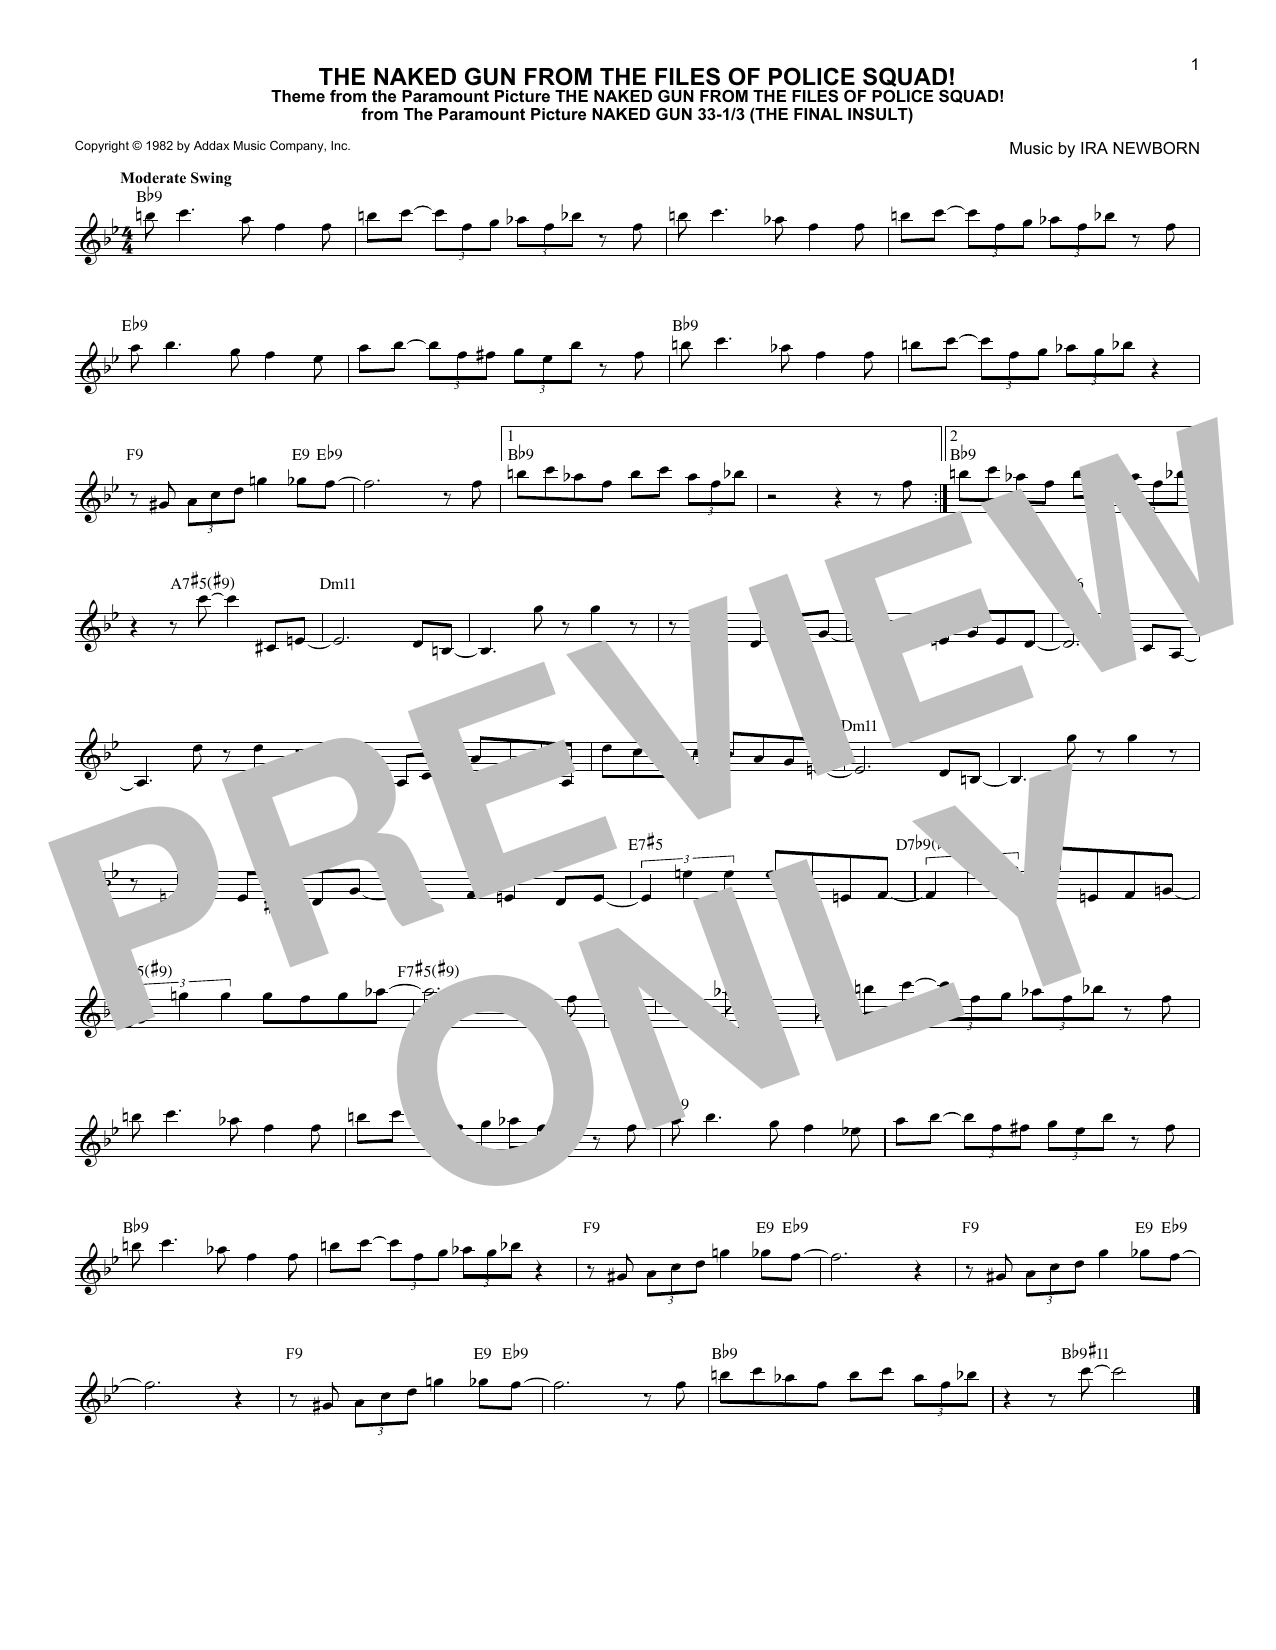 Download Ira Newborn The Naked Gun From The Files Of Police Sheet Music